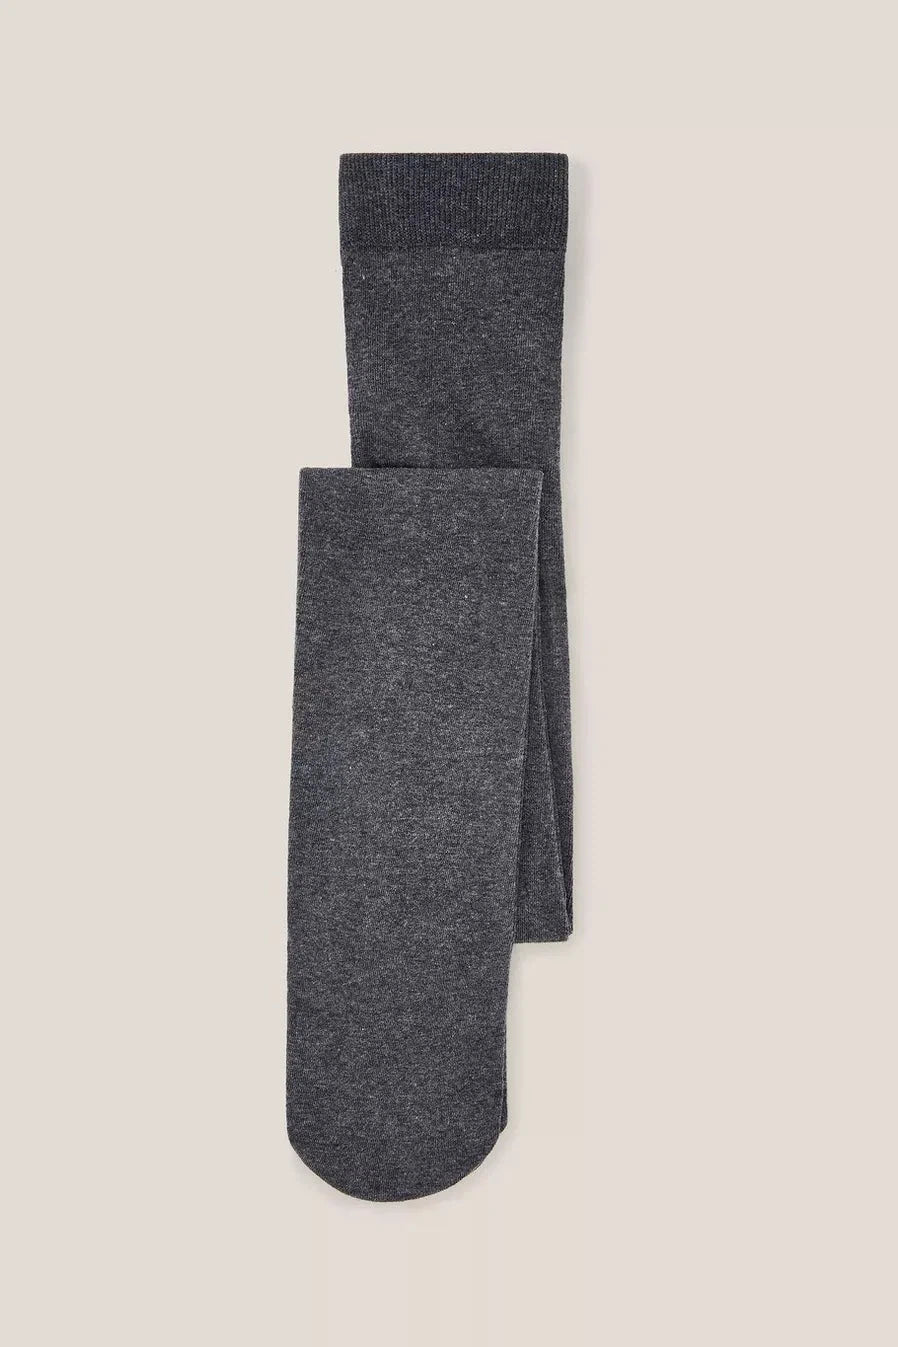 White Stuff Patty Plain Versatile Tights - Charcoal Grey-Womens-Ohh! By Gum - Shop Sustainable